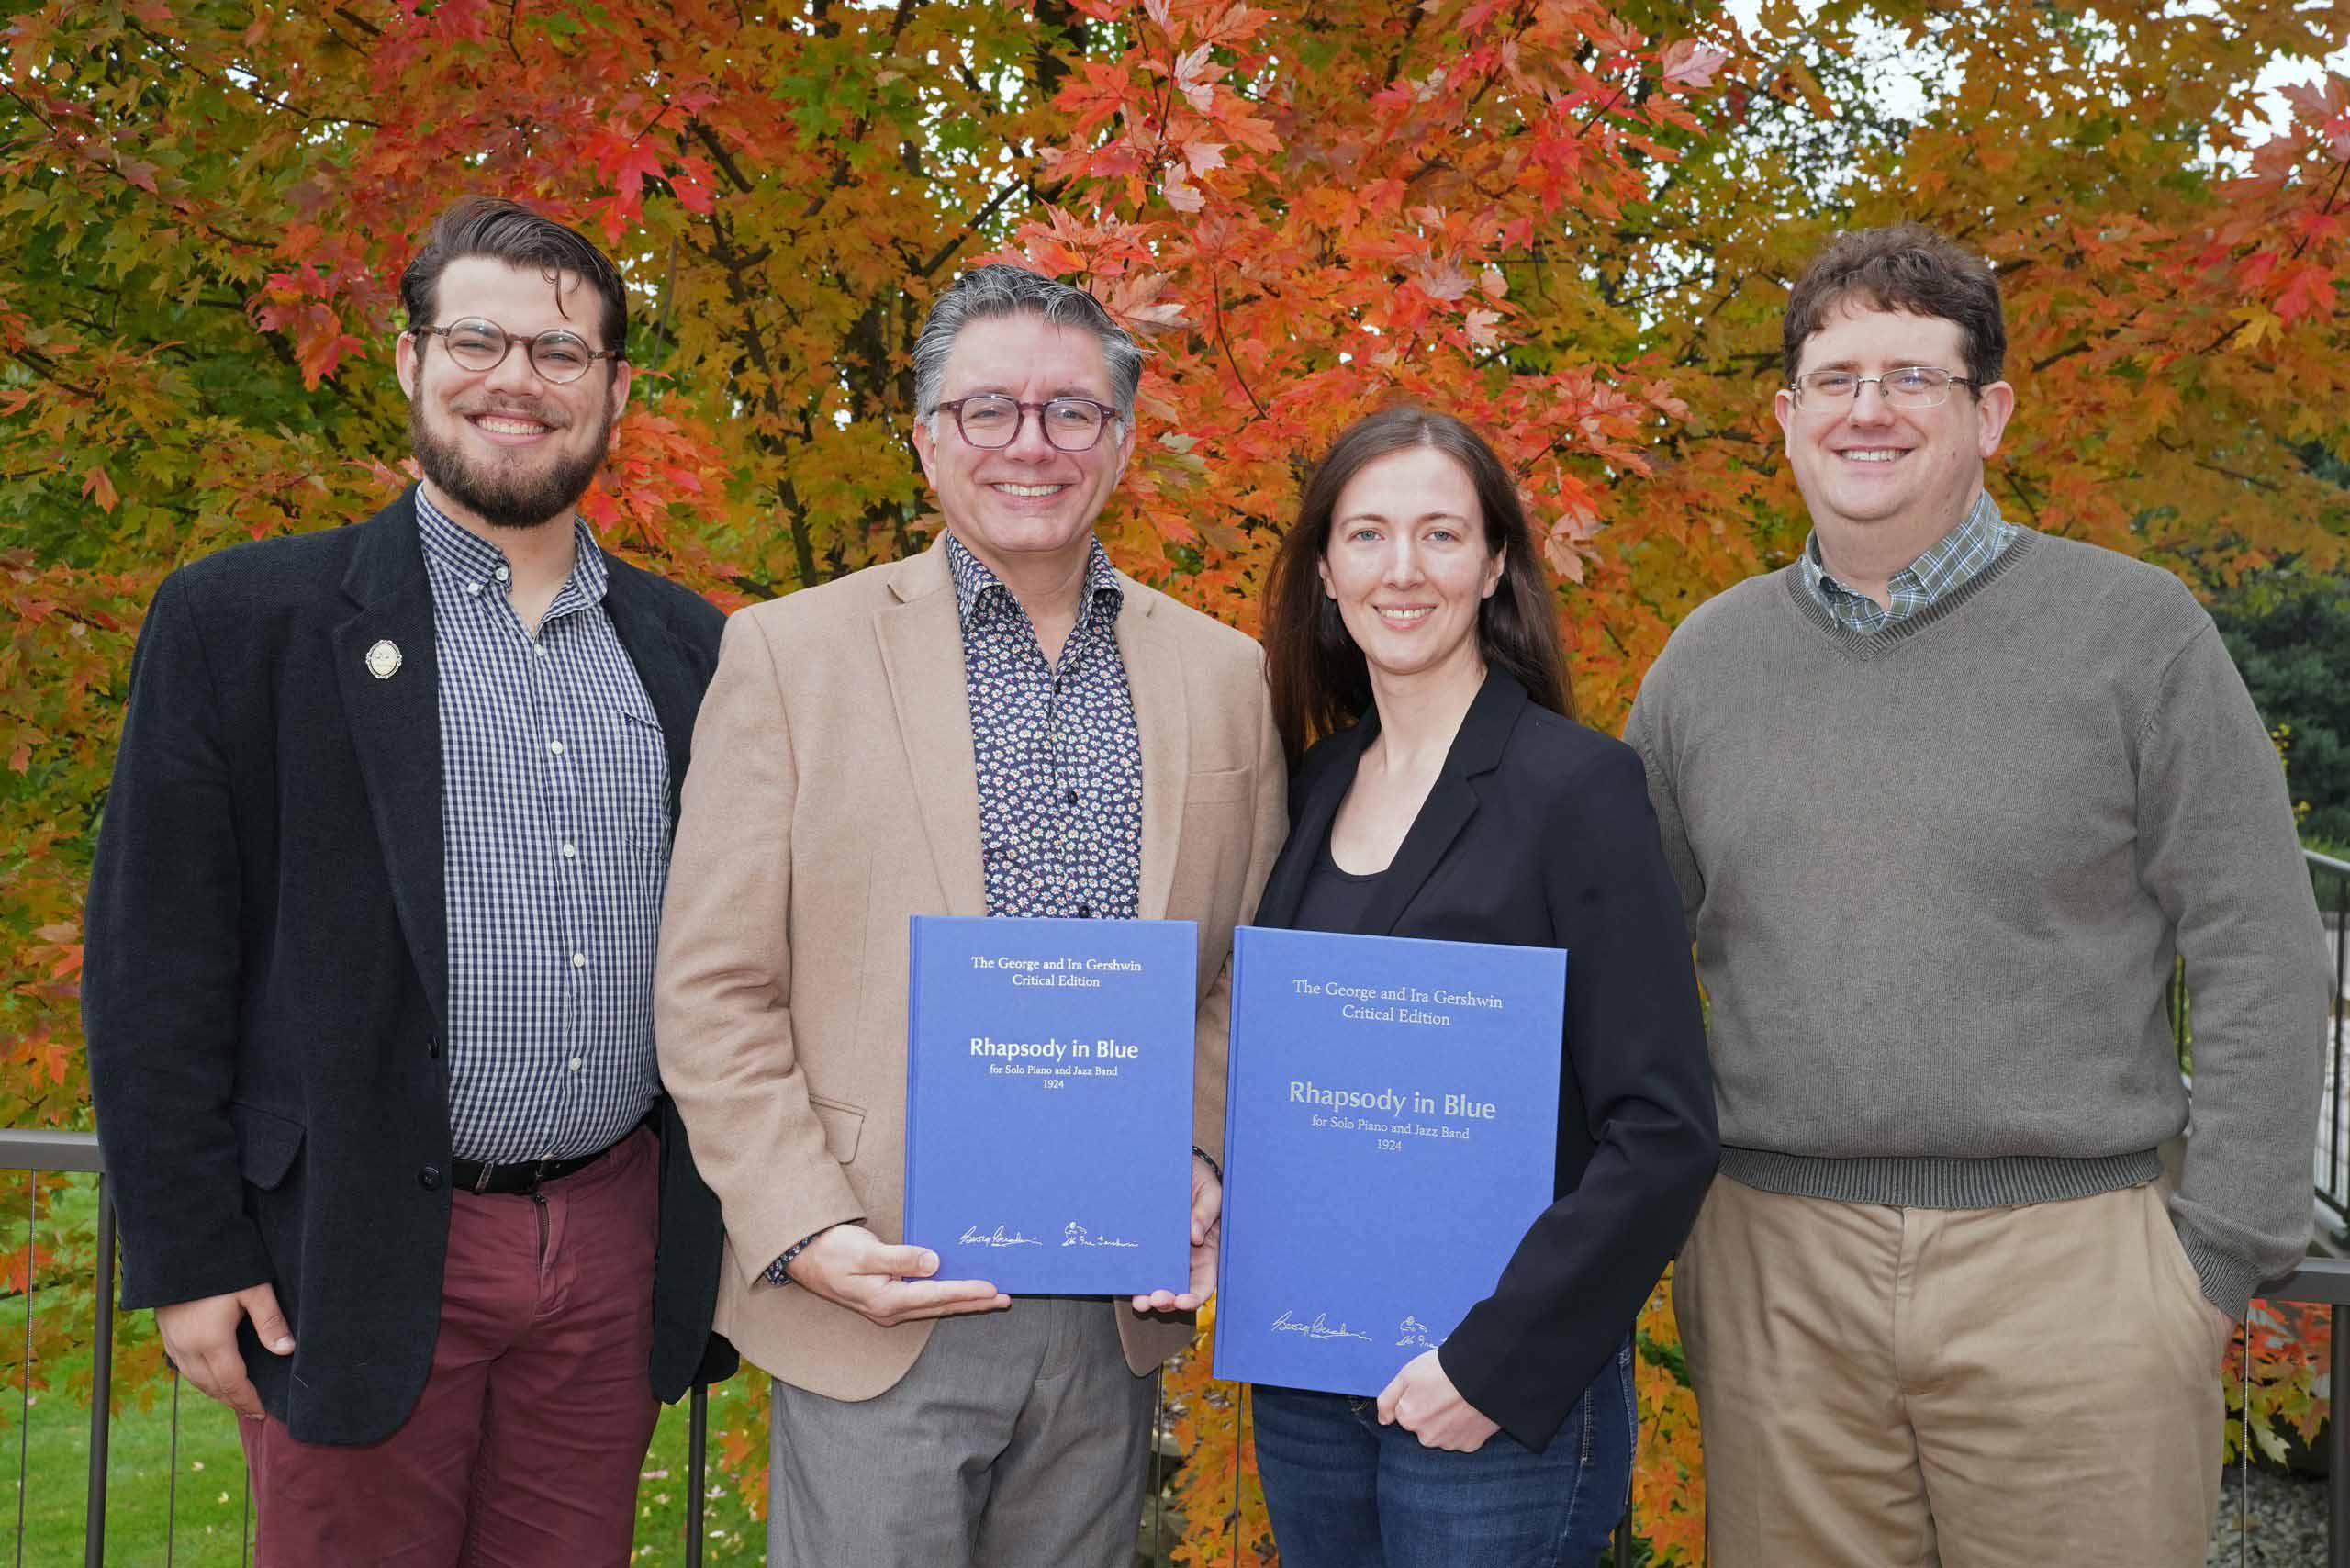 Four people pose outdoors, holding up two volumes with blue covers